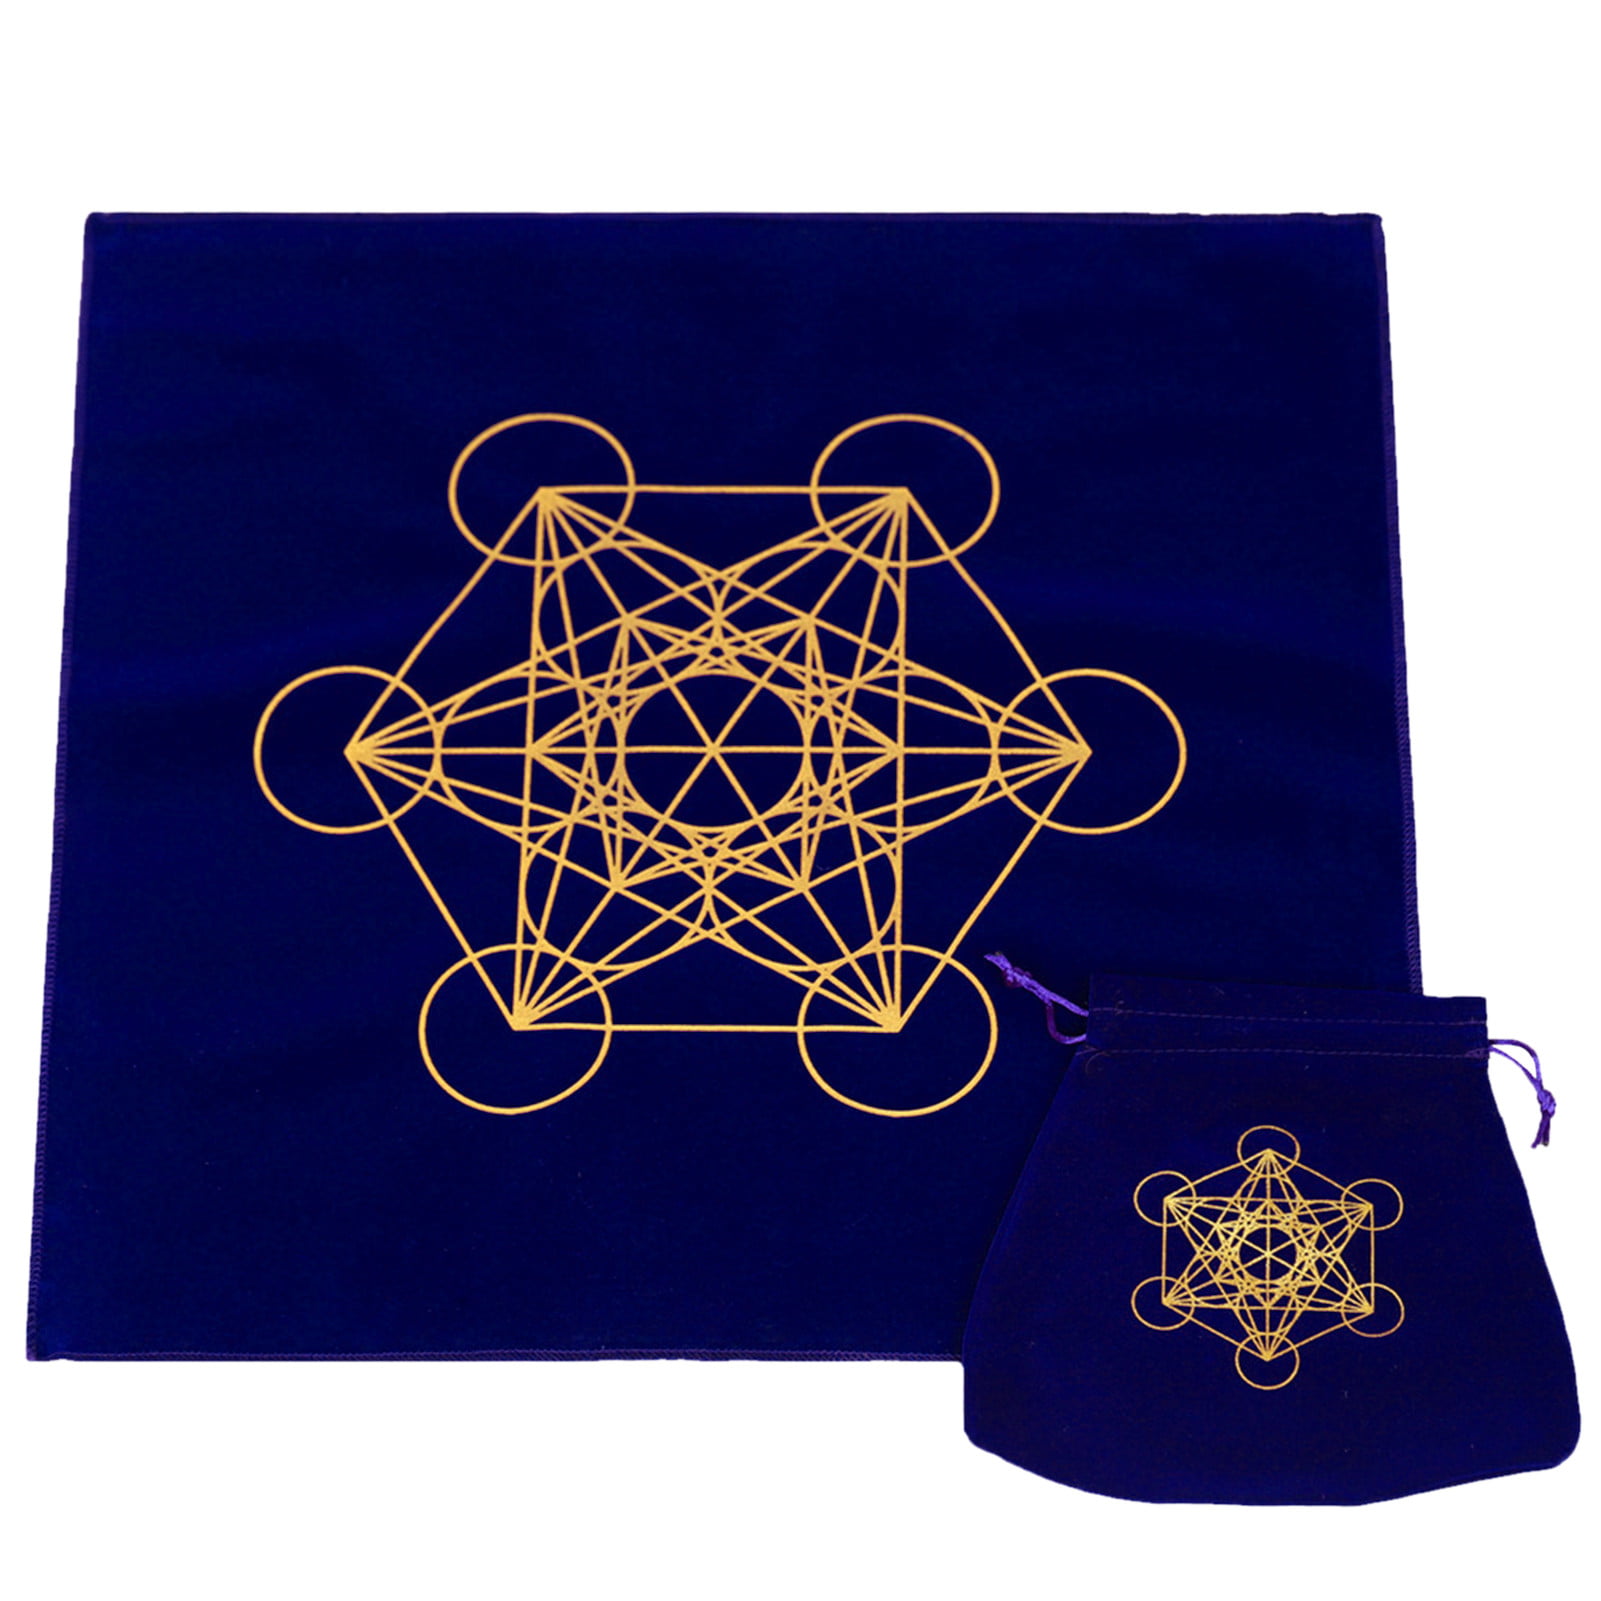 Blessume Cross Star Altar Tarot Table Cloth/Pouch Divination Cards Wicca Cloth 